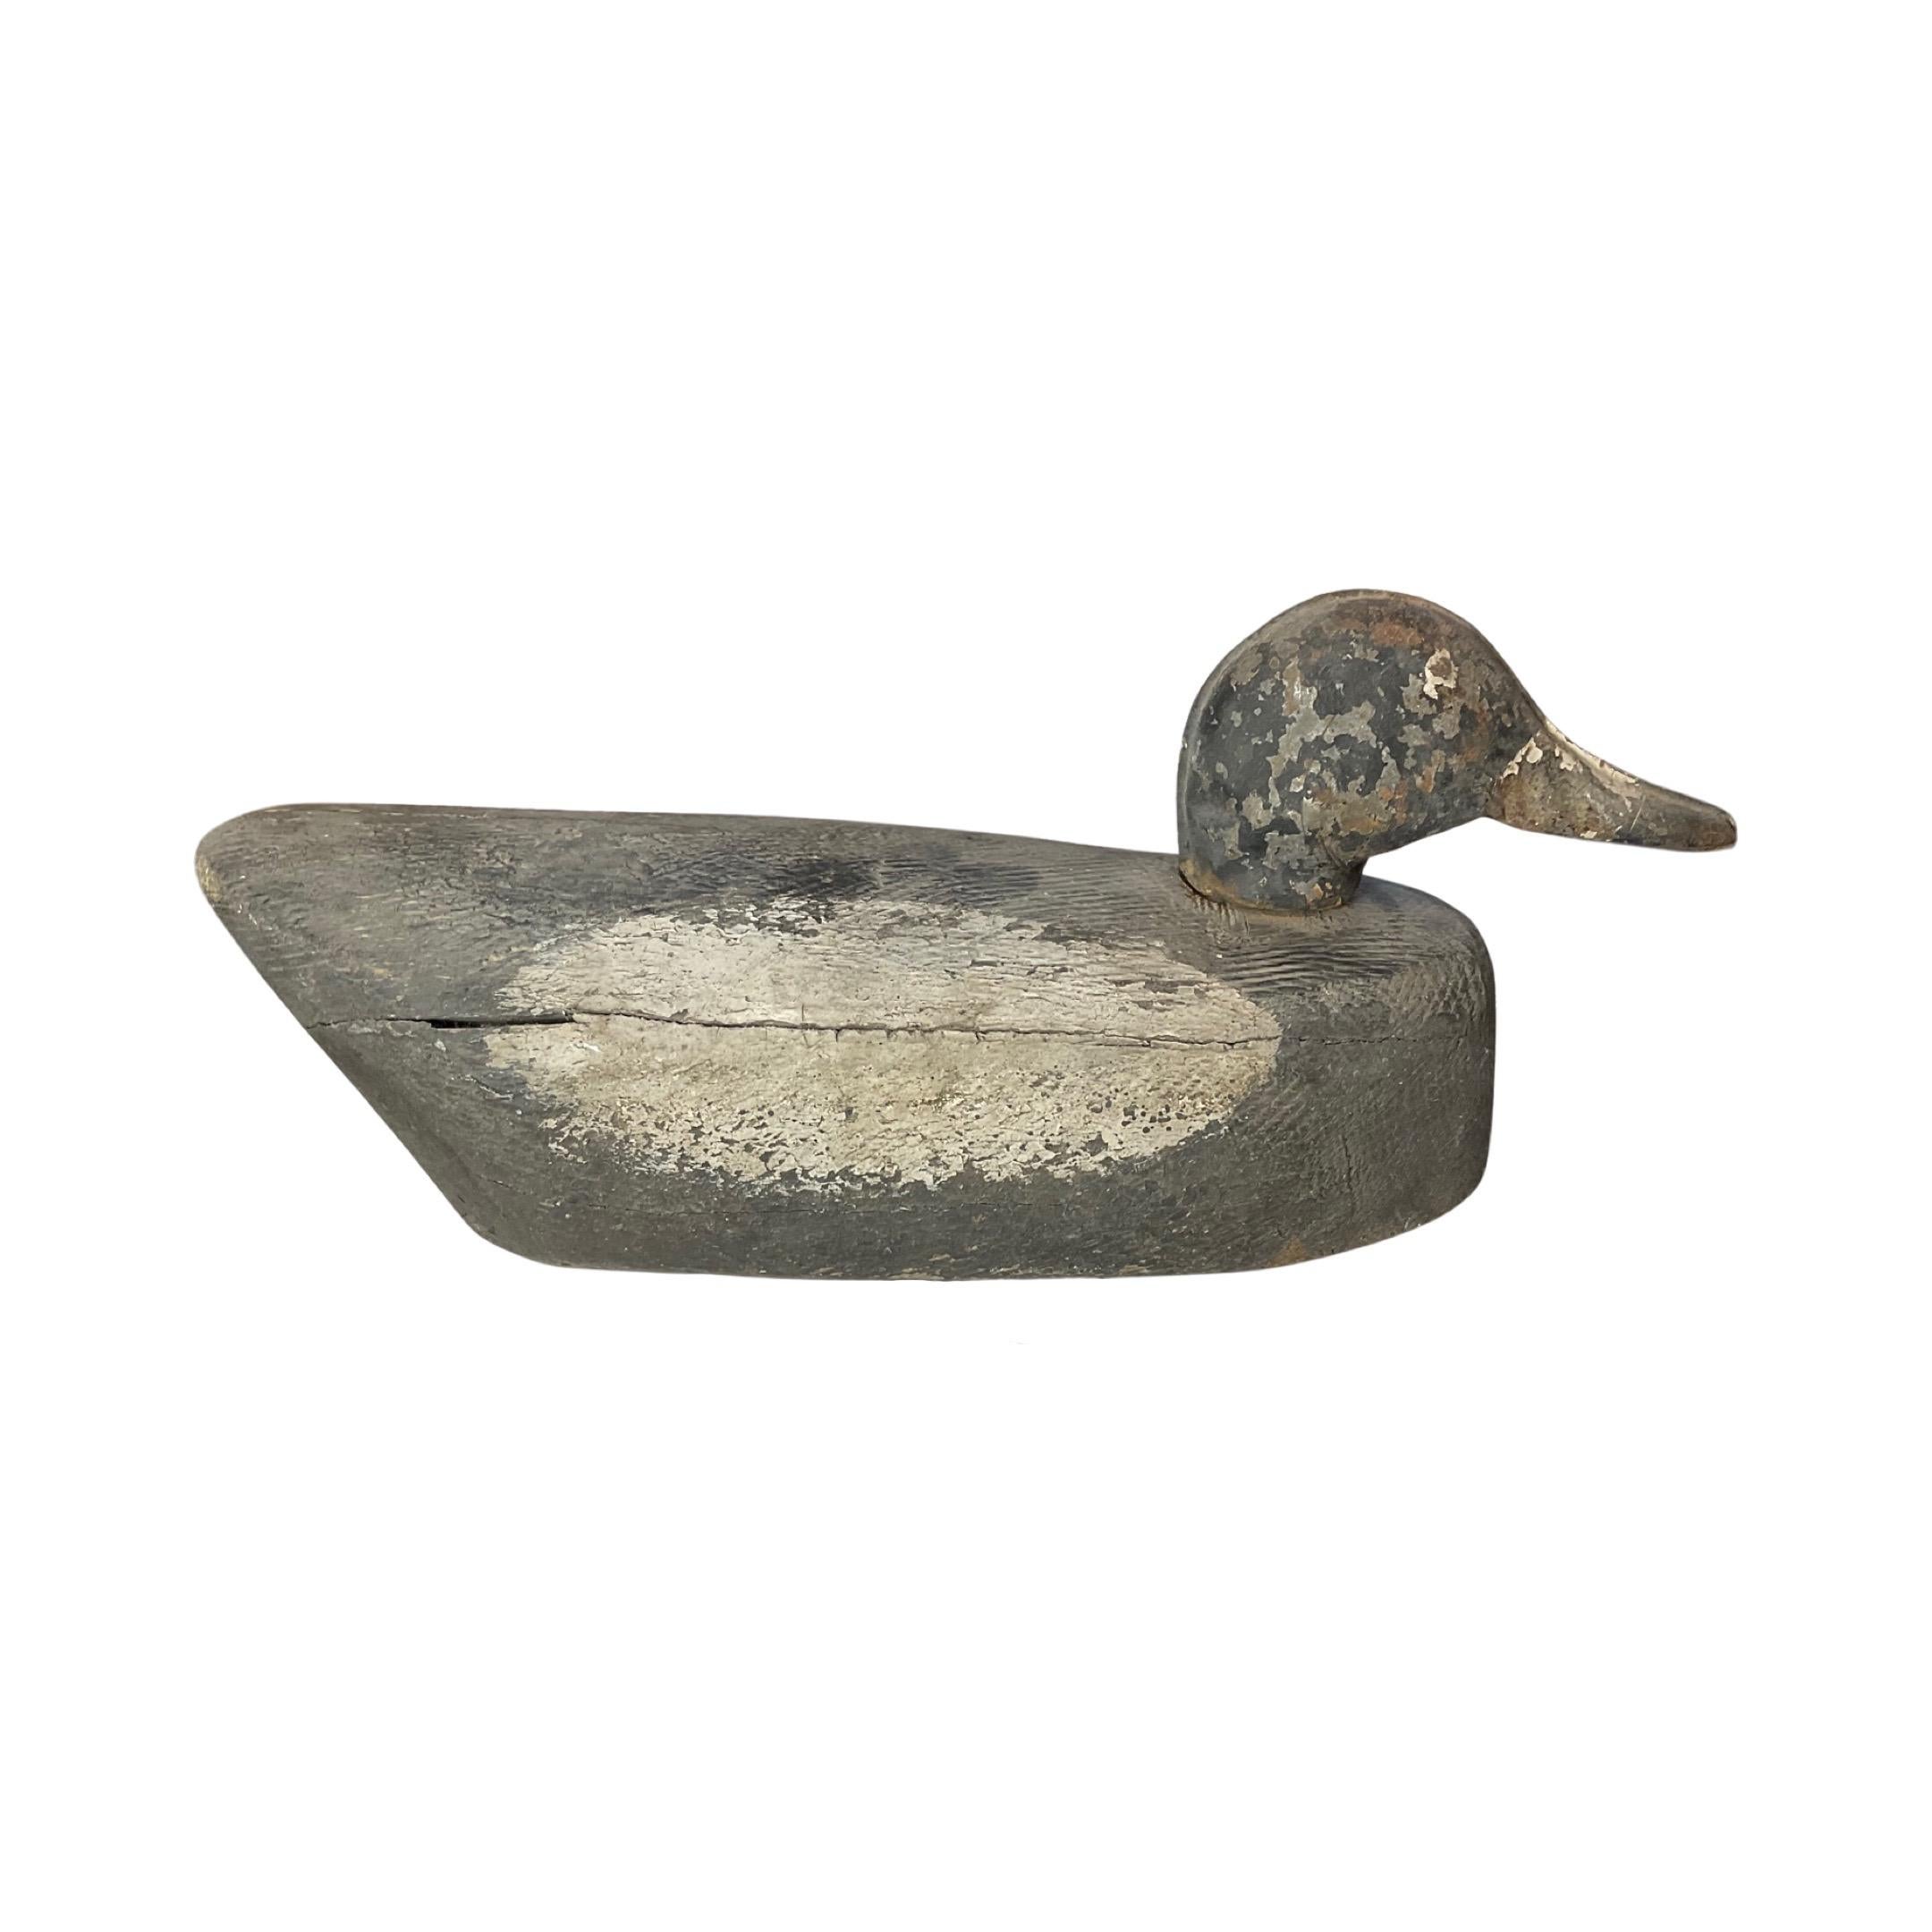 Experience the beauty and craftsmanship of a 19th century Chinese Antique Wooden Duck Decoy Sculpture. Hand-carved from wood, this intricate decoy is a true testament to the artistry of its time. Add a touch of history and elegance to your home